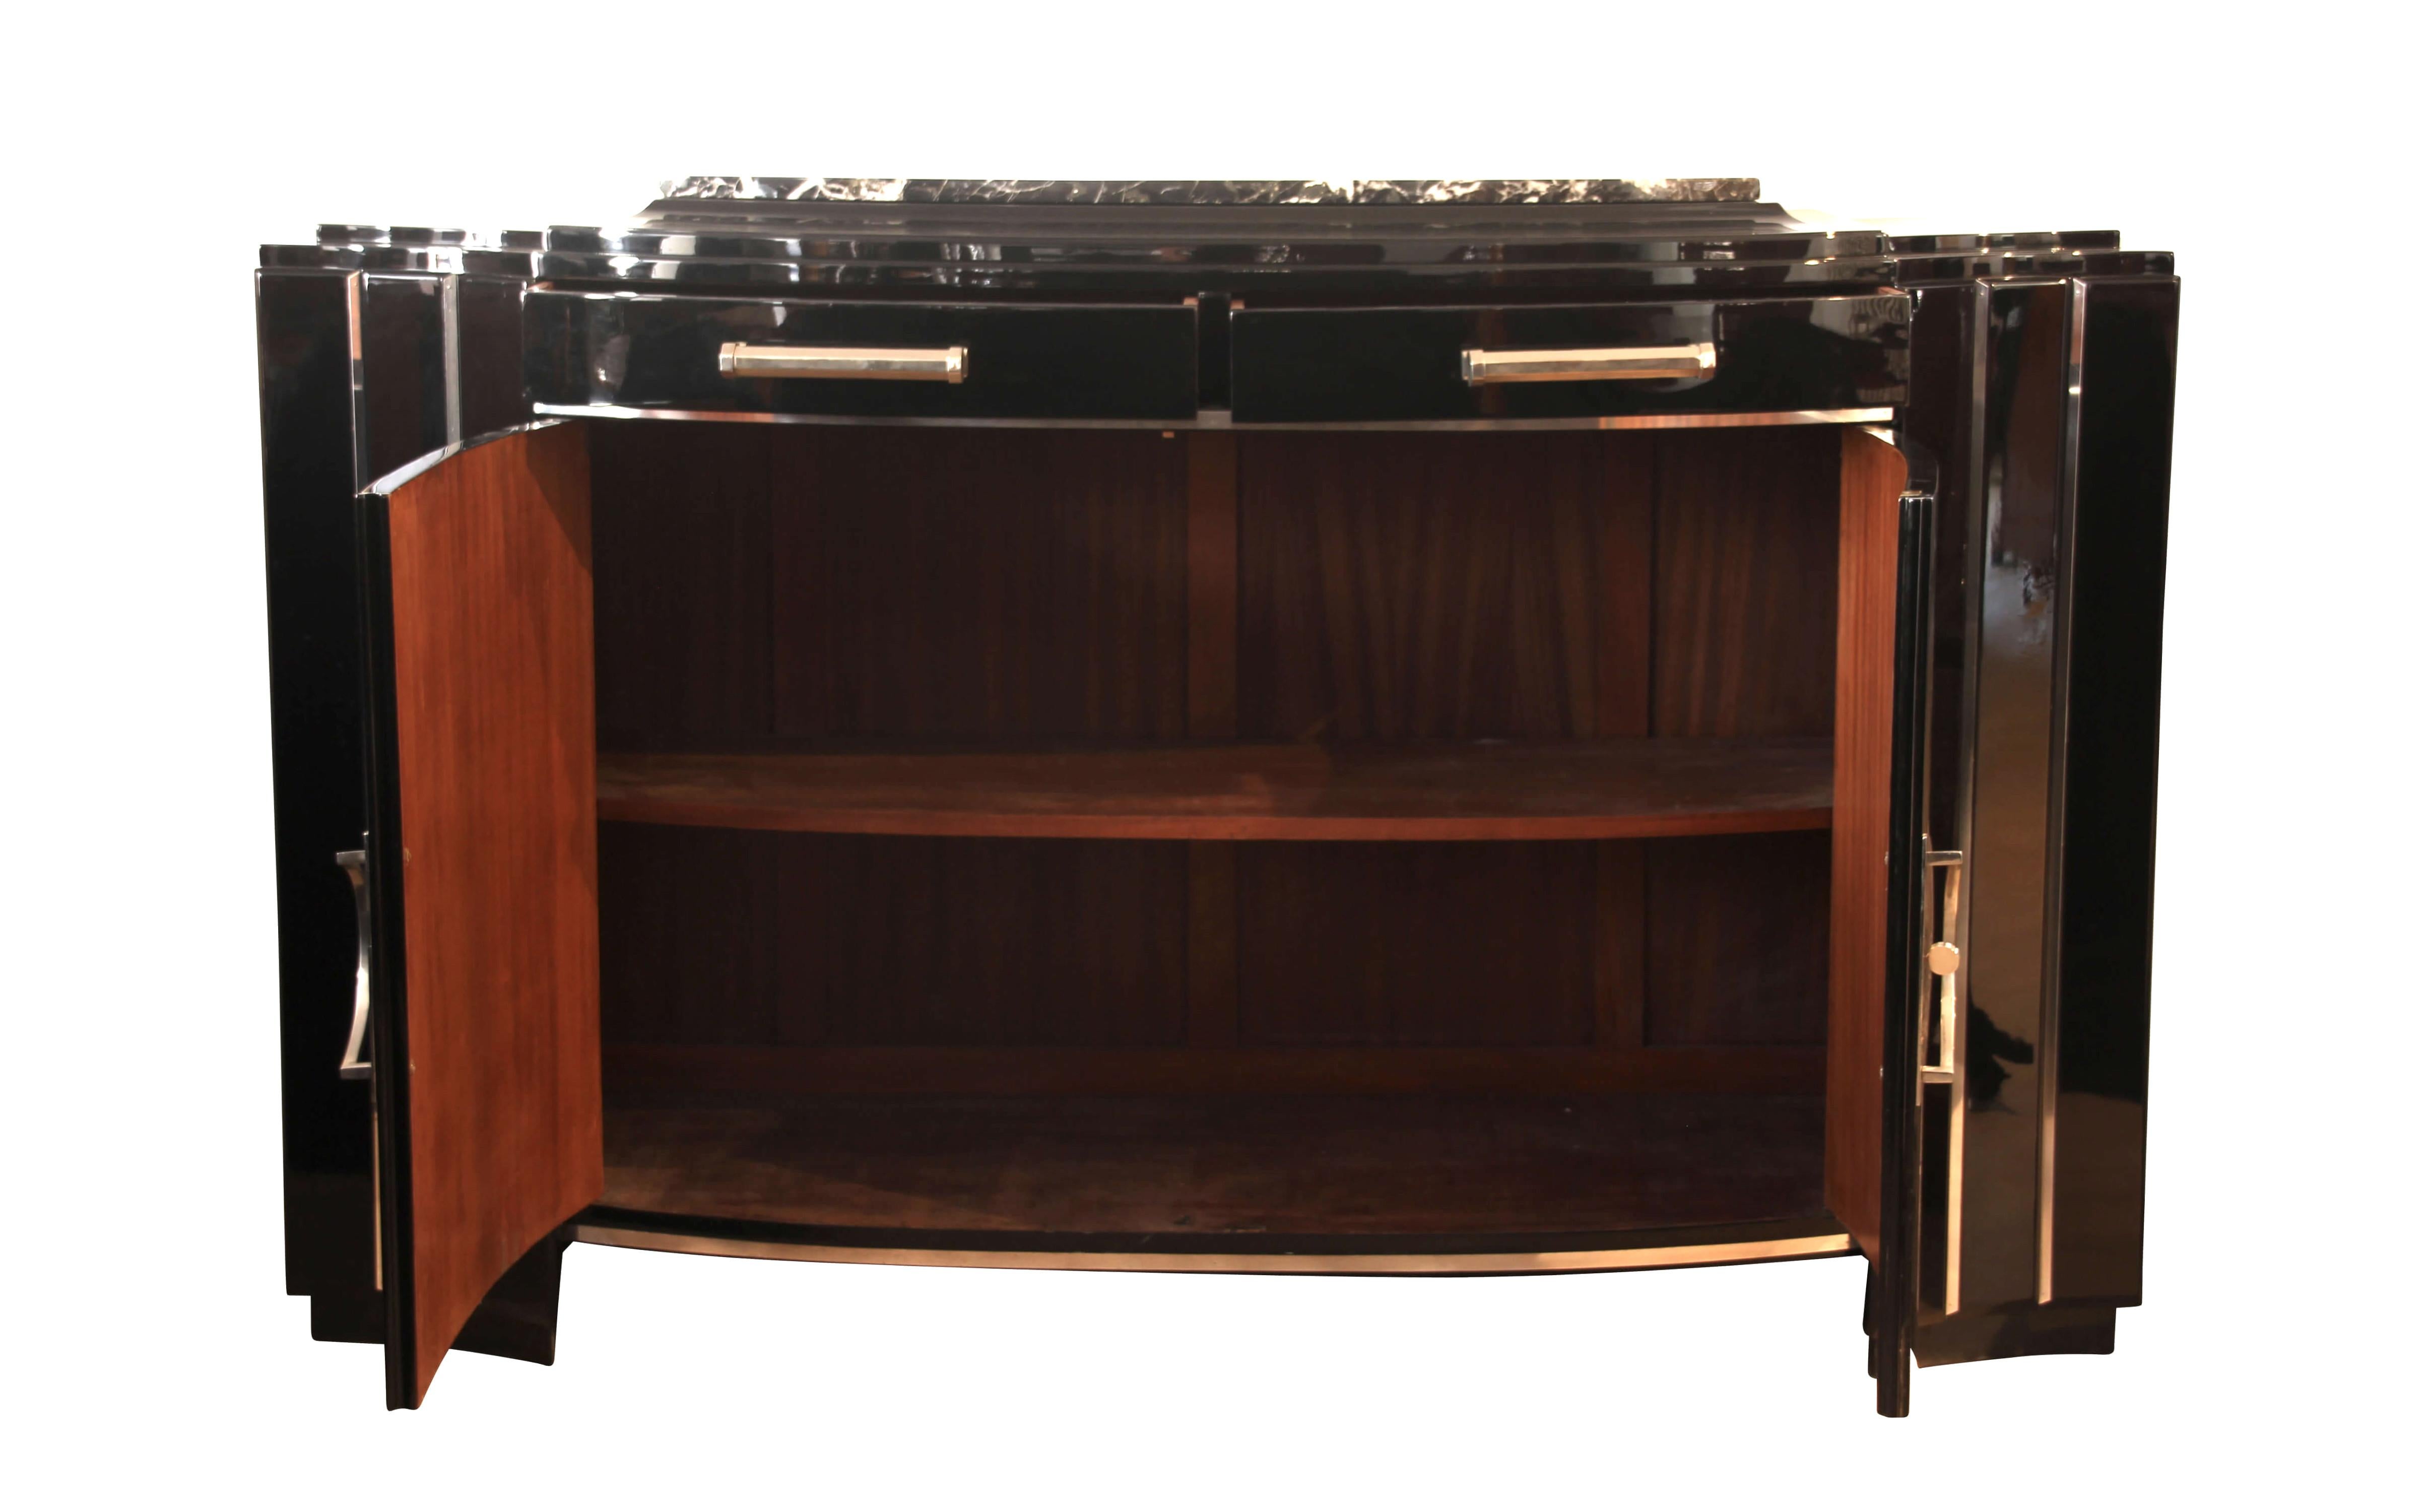 French Art Deco Sideboard, Curved Front, Black, Mahogany and Chrome, France, circa 1930